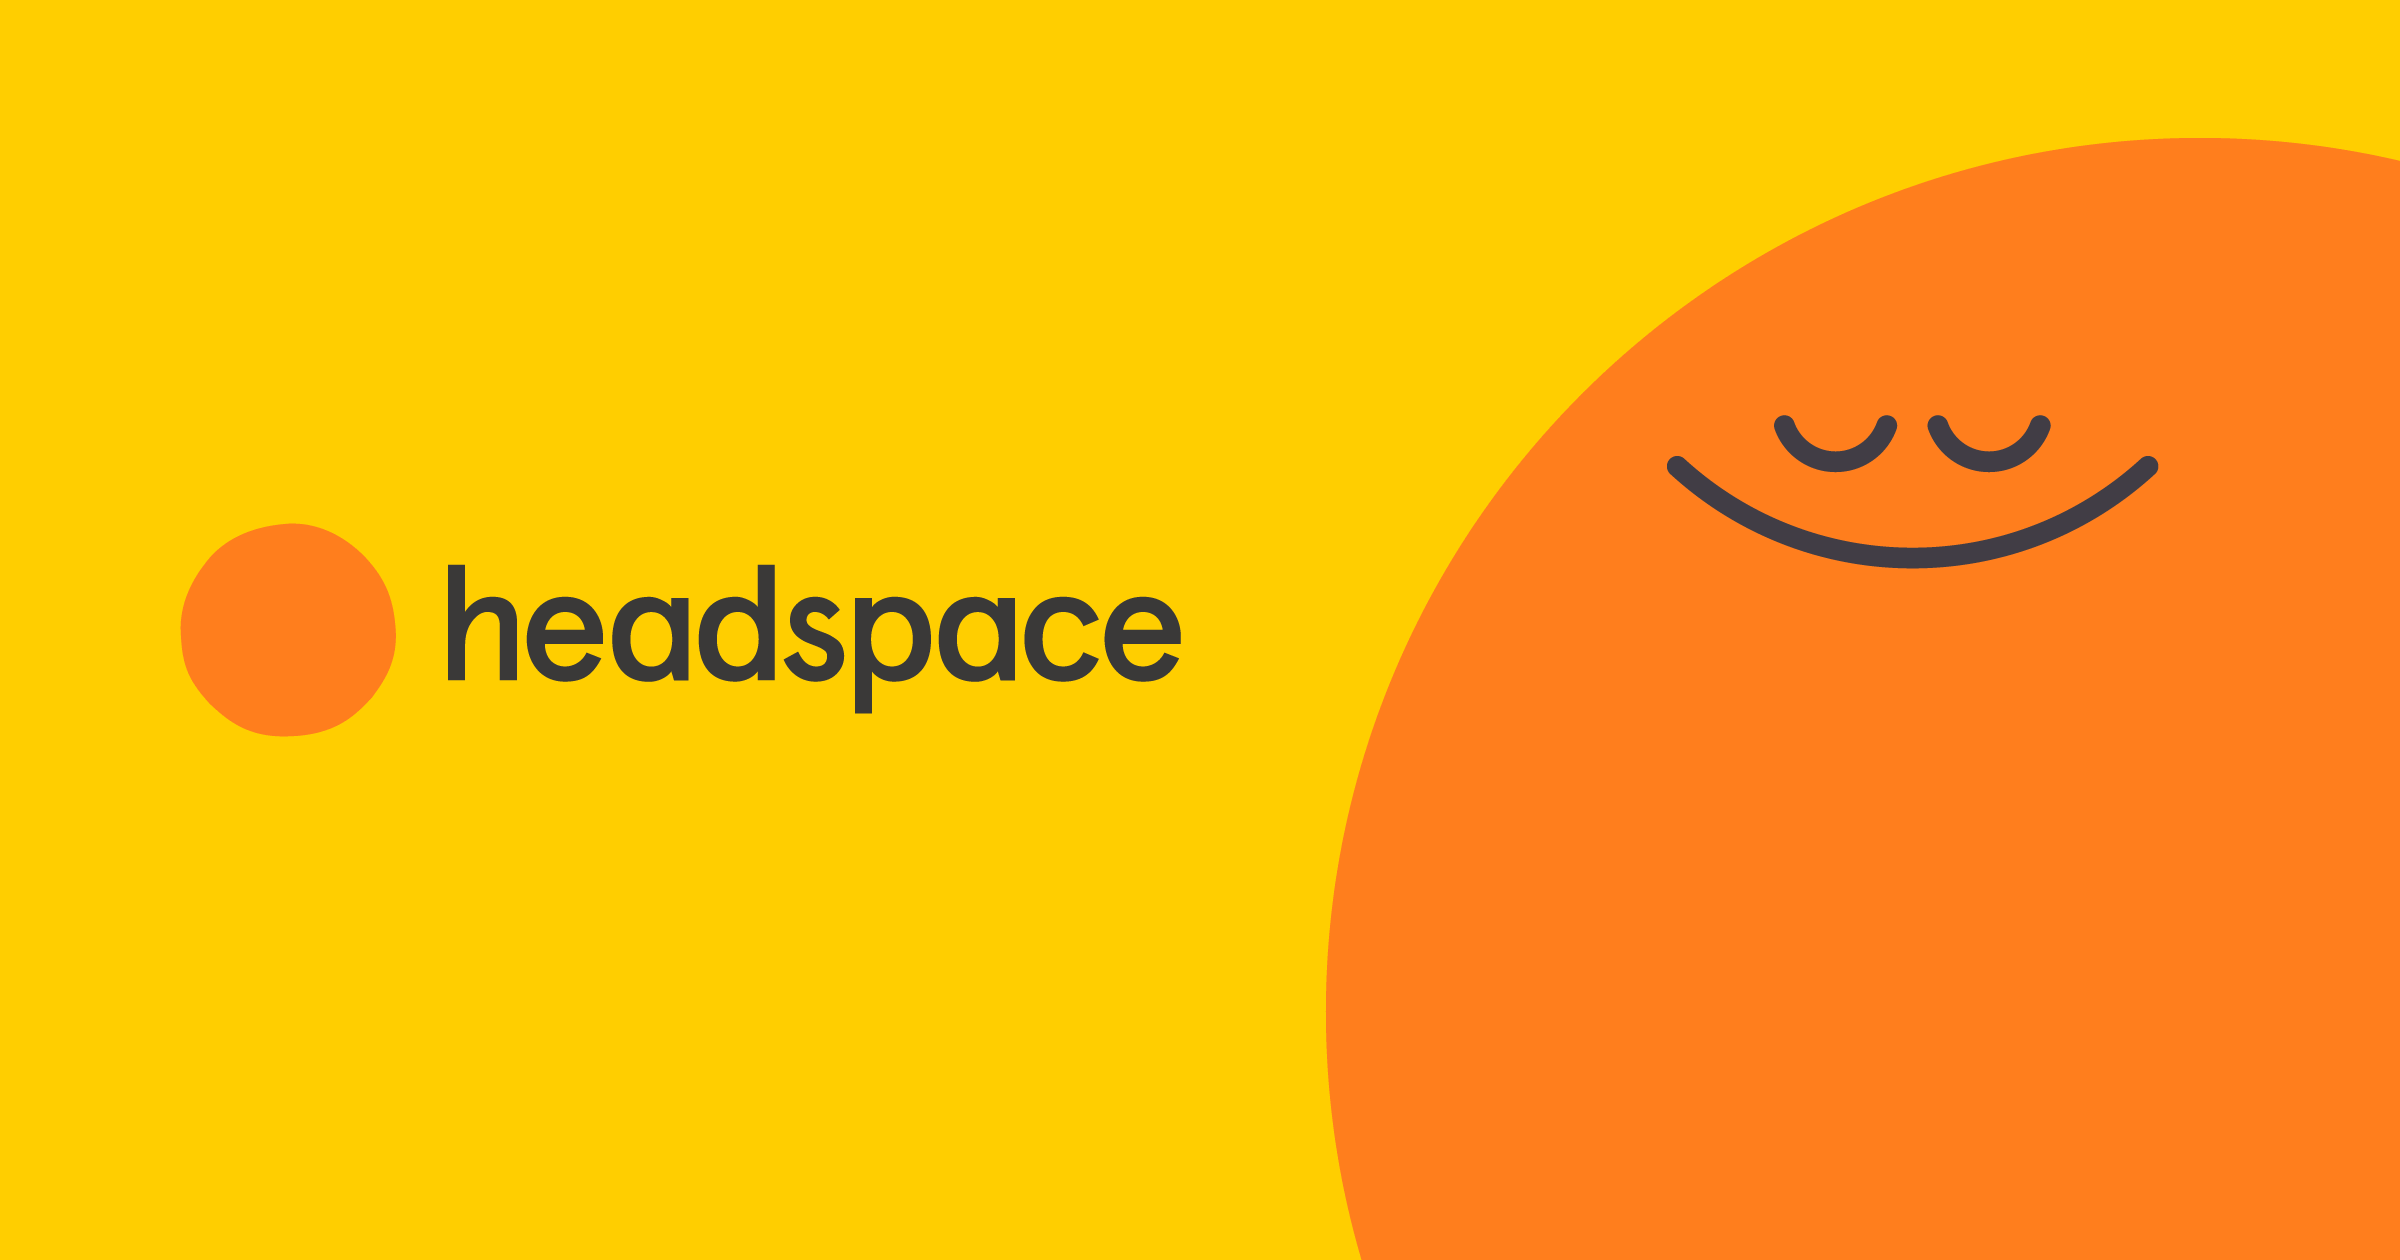 Work from home app - Head space